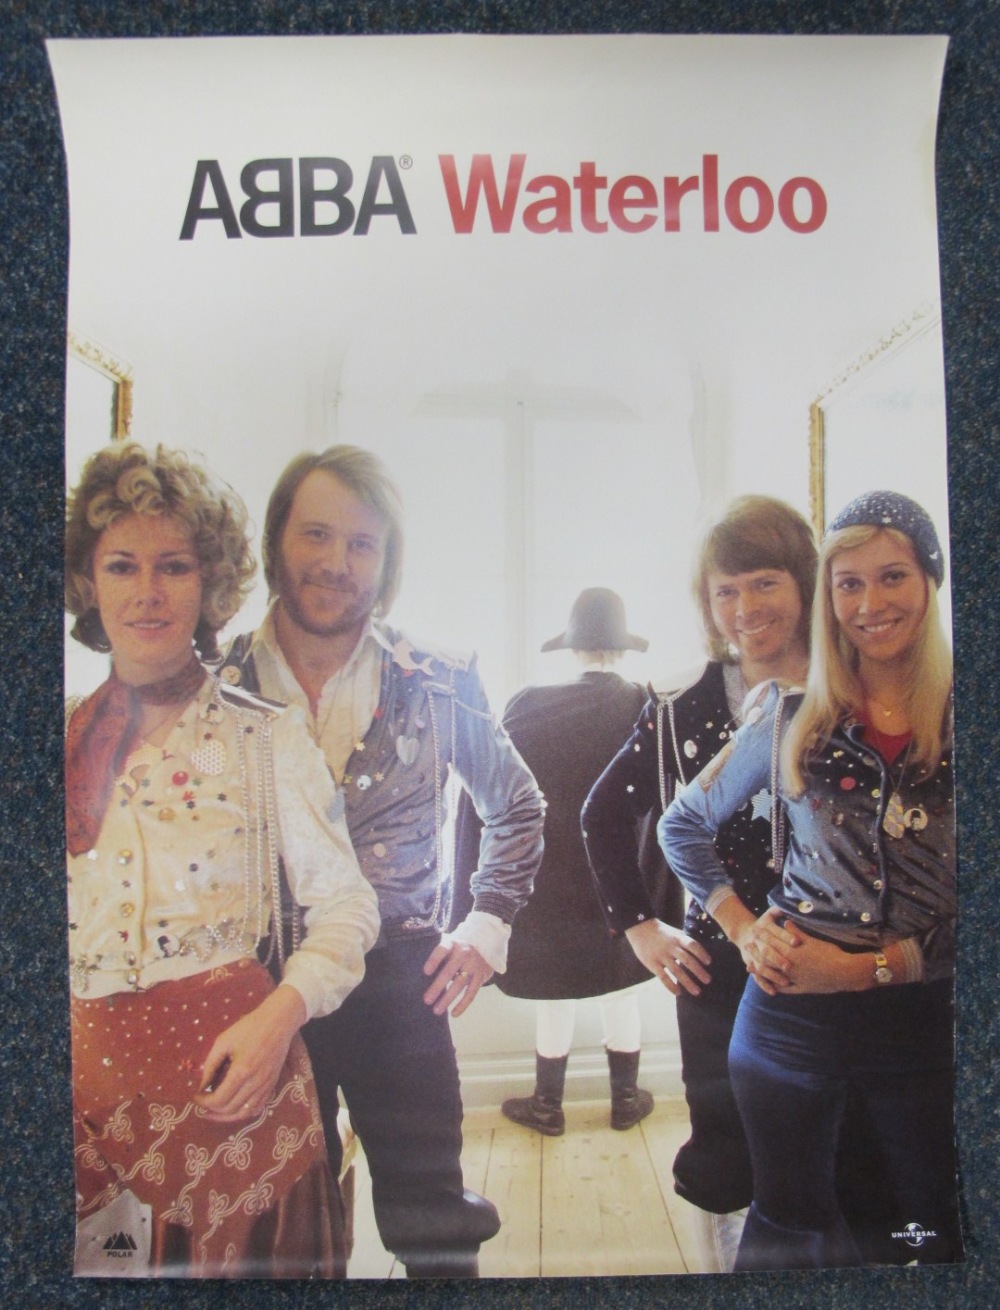 Music Posters, Abba, 3 posters by Polar Music / Universal, Waterloo, Voulez-Vous & Super Trouper,